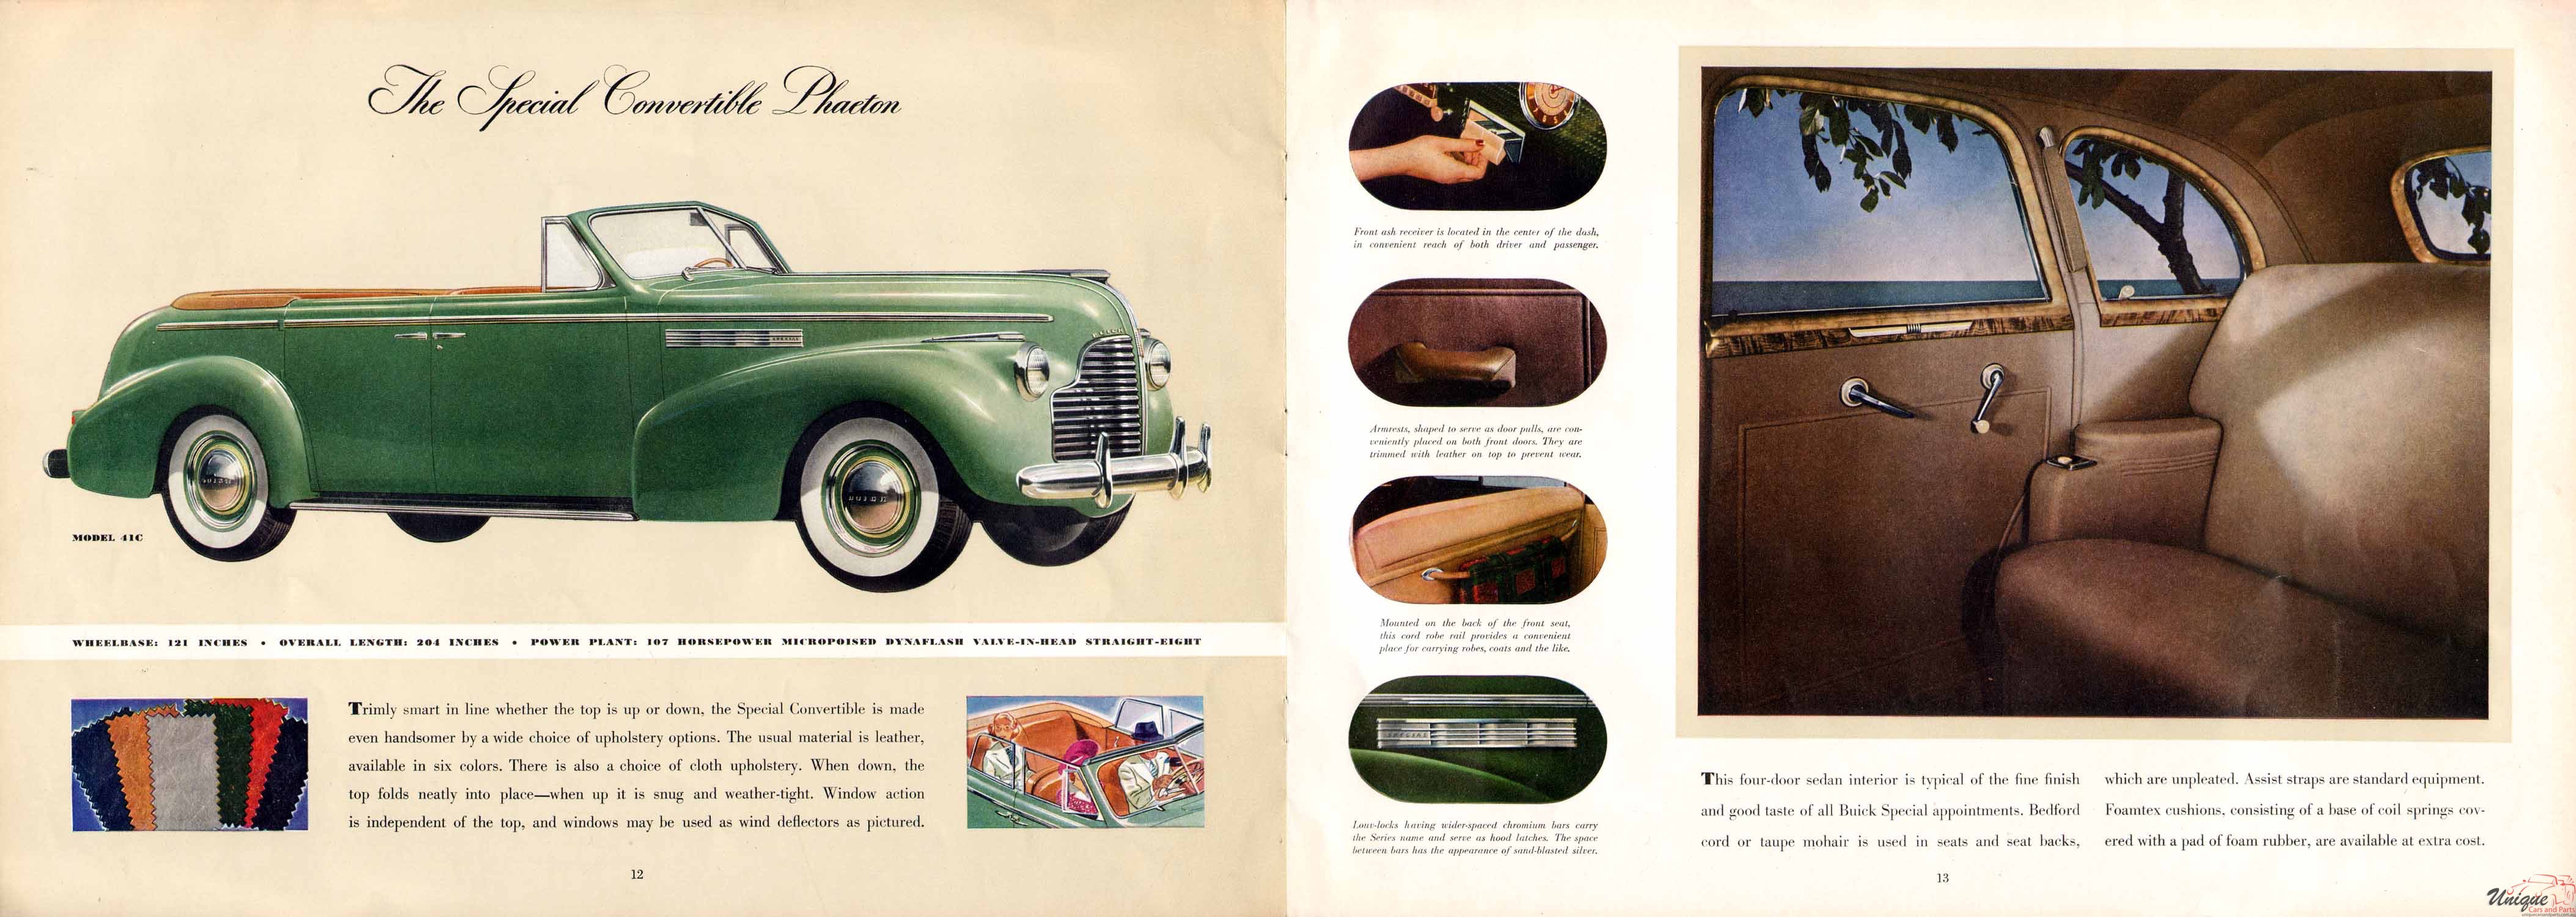 1940 Buick Brochure Page 5